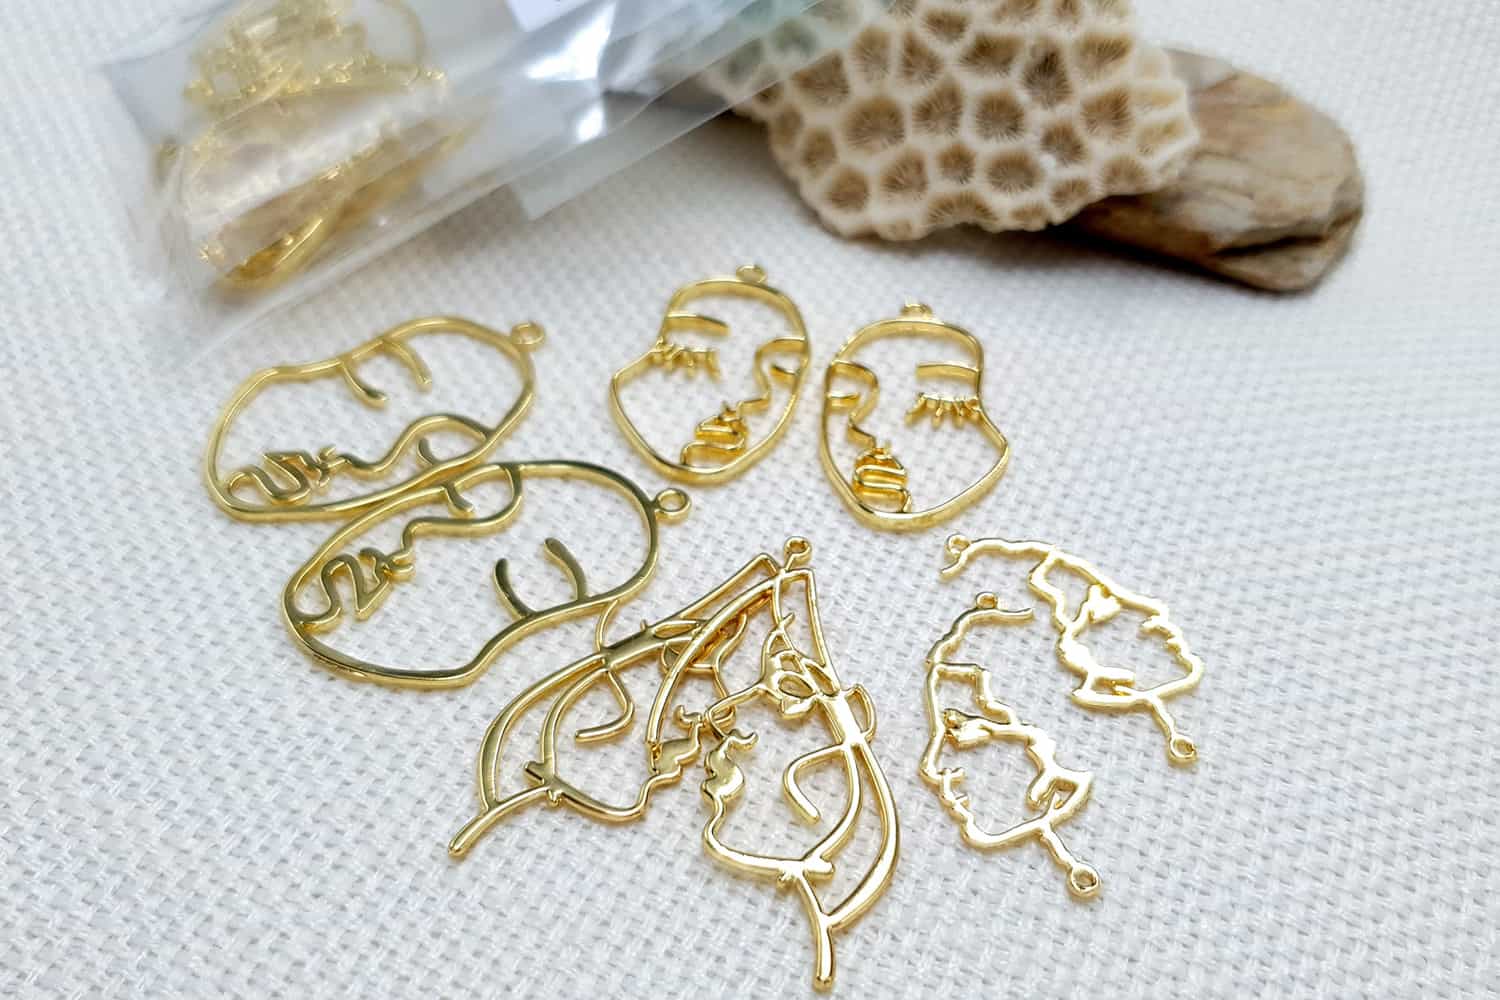 Faces - Set of 8pcs Golden Color Metal Jewelry Findings (22396)